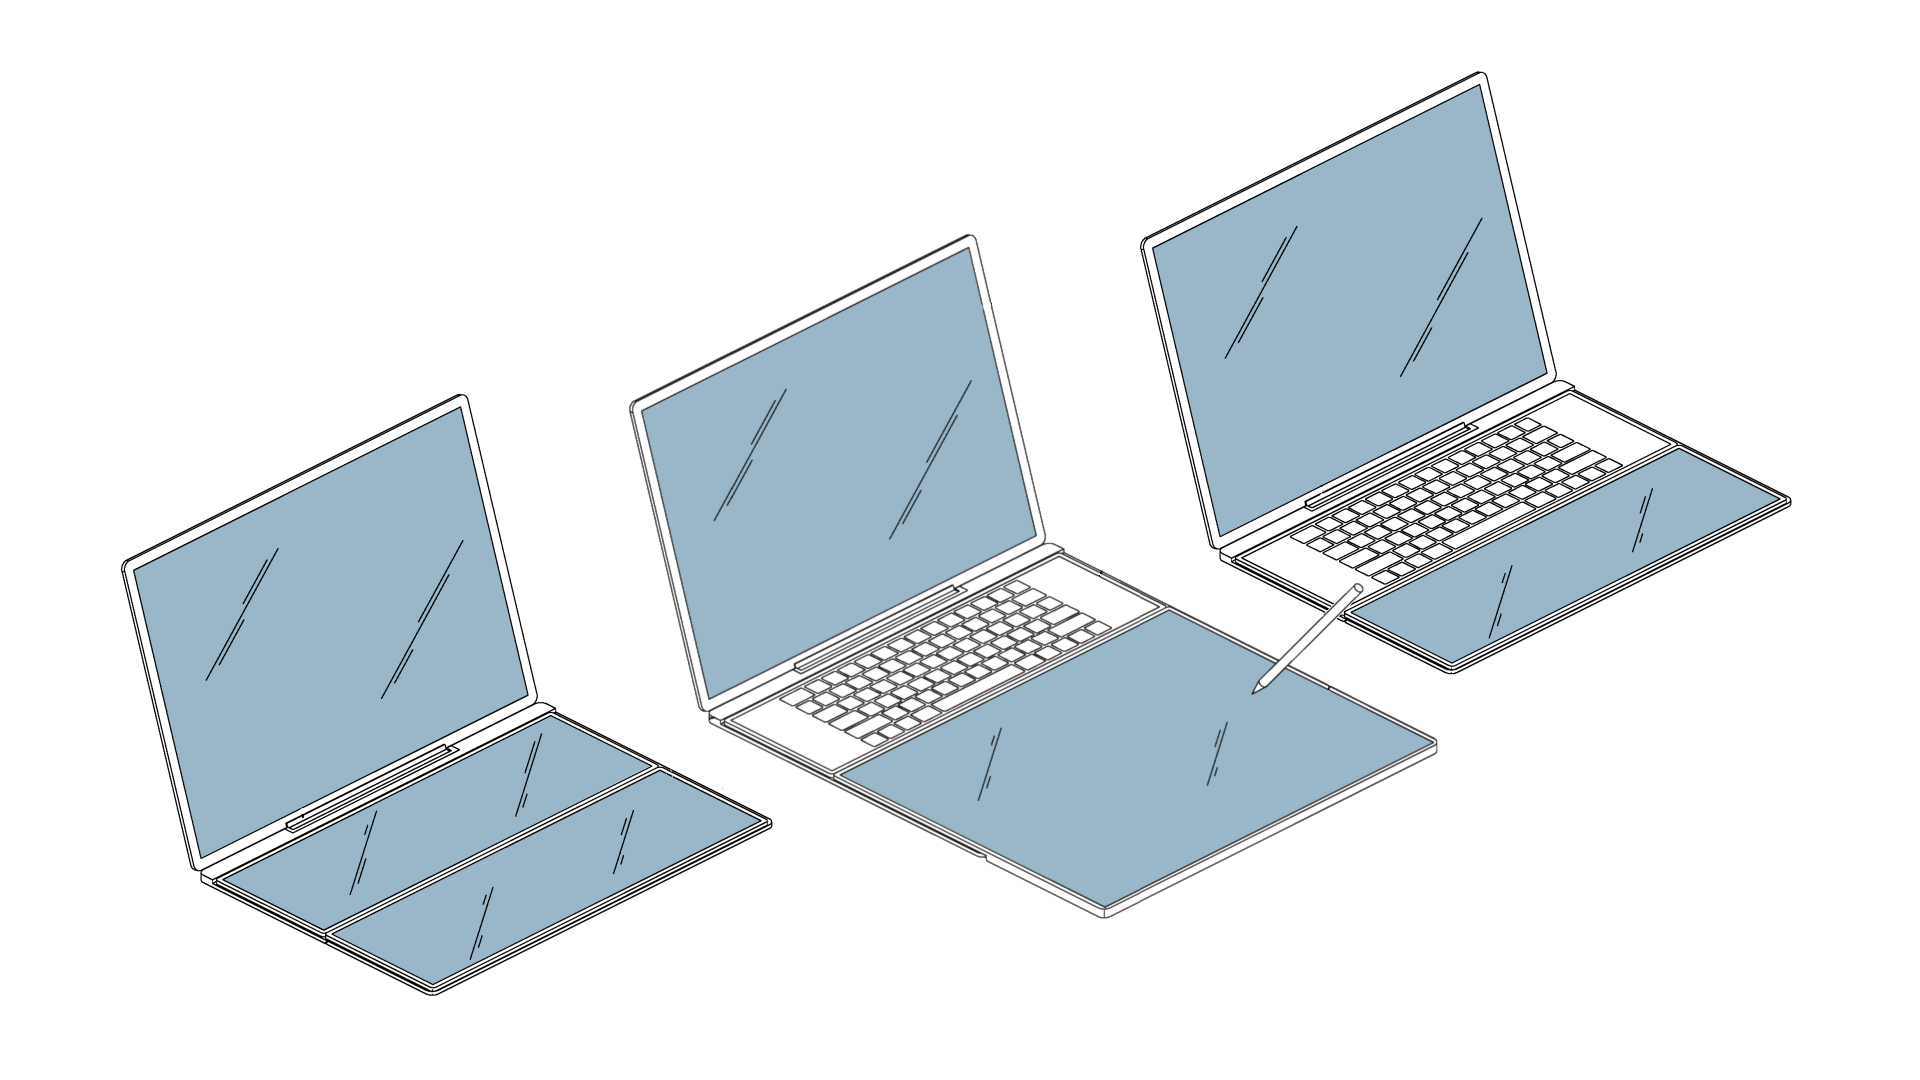 Modular MacBook Pro patent image showing dual screen, triple screen, and graphics tablet configurations.